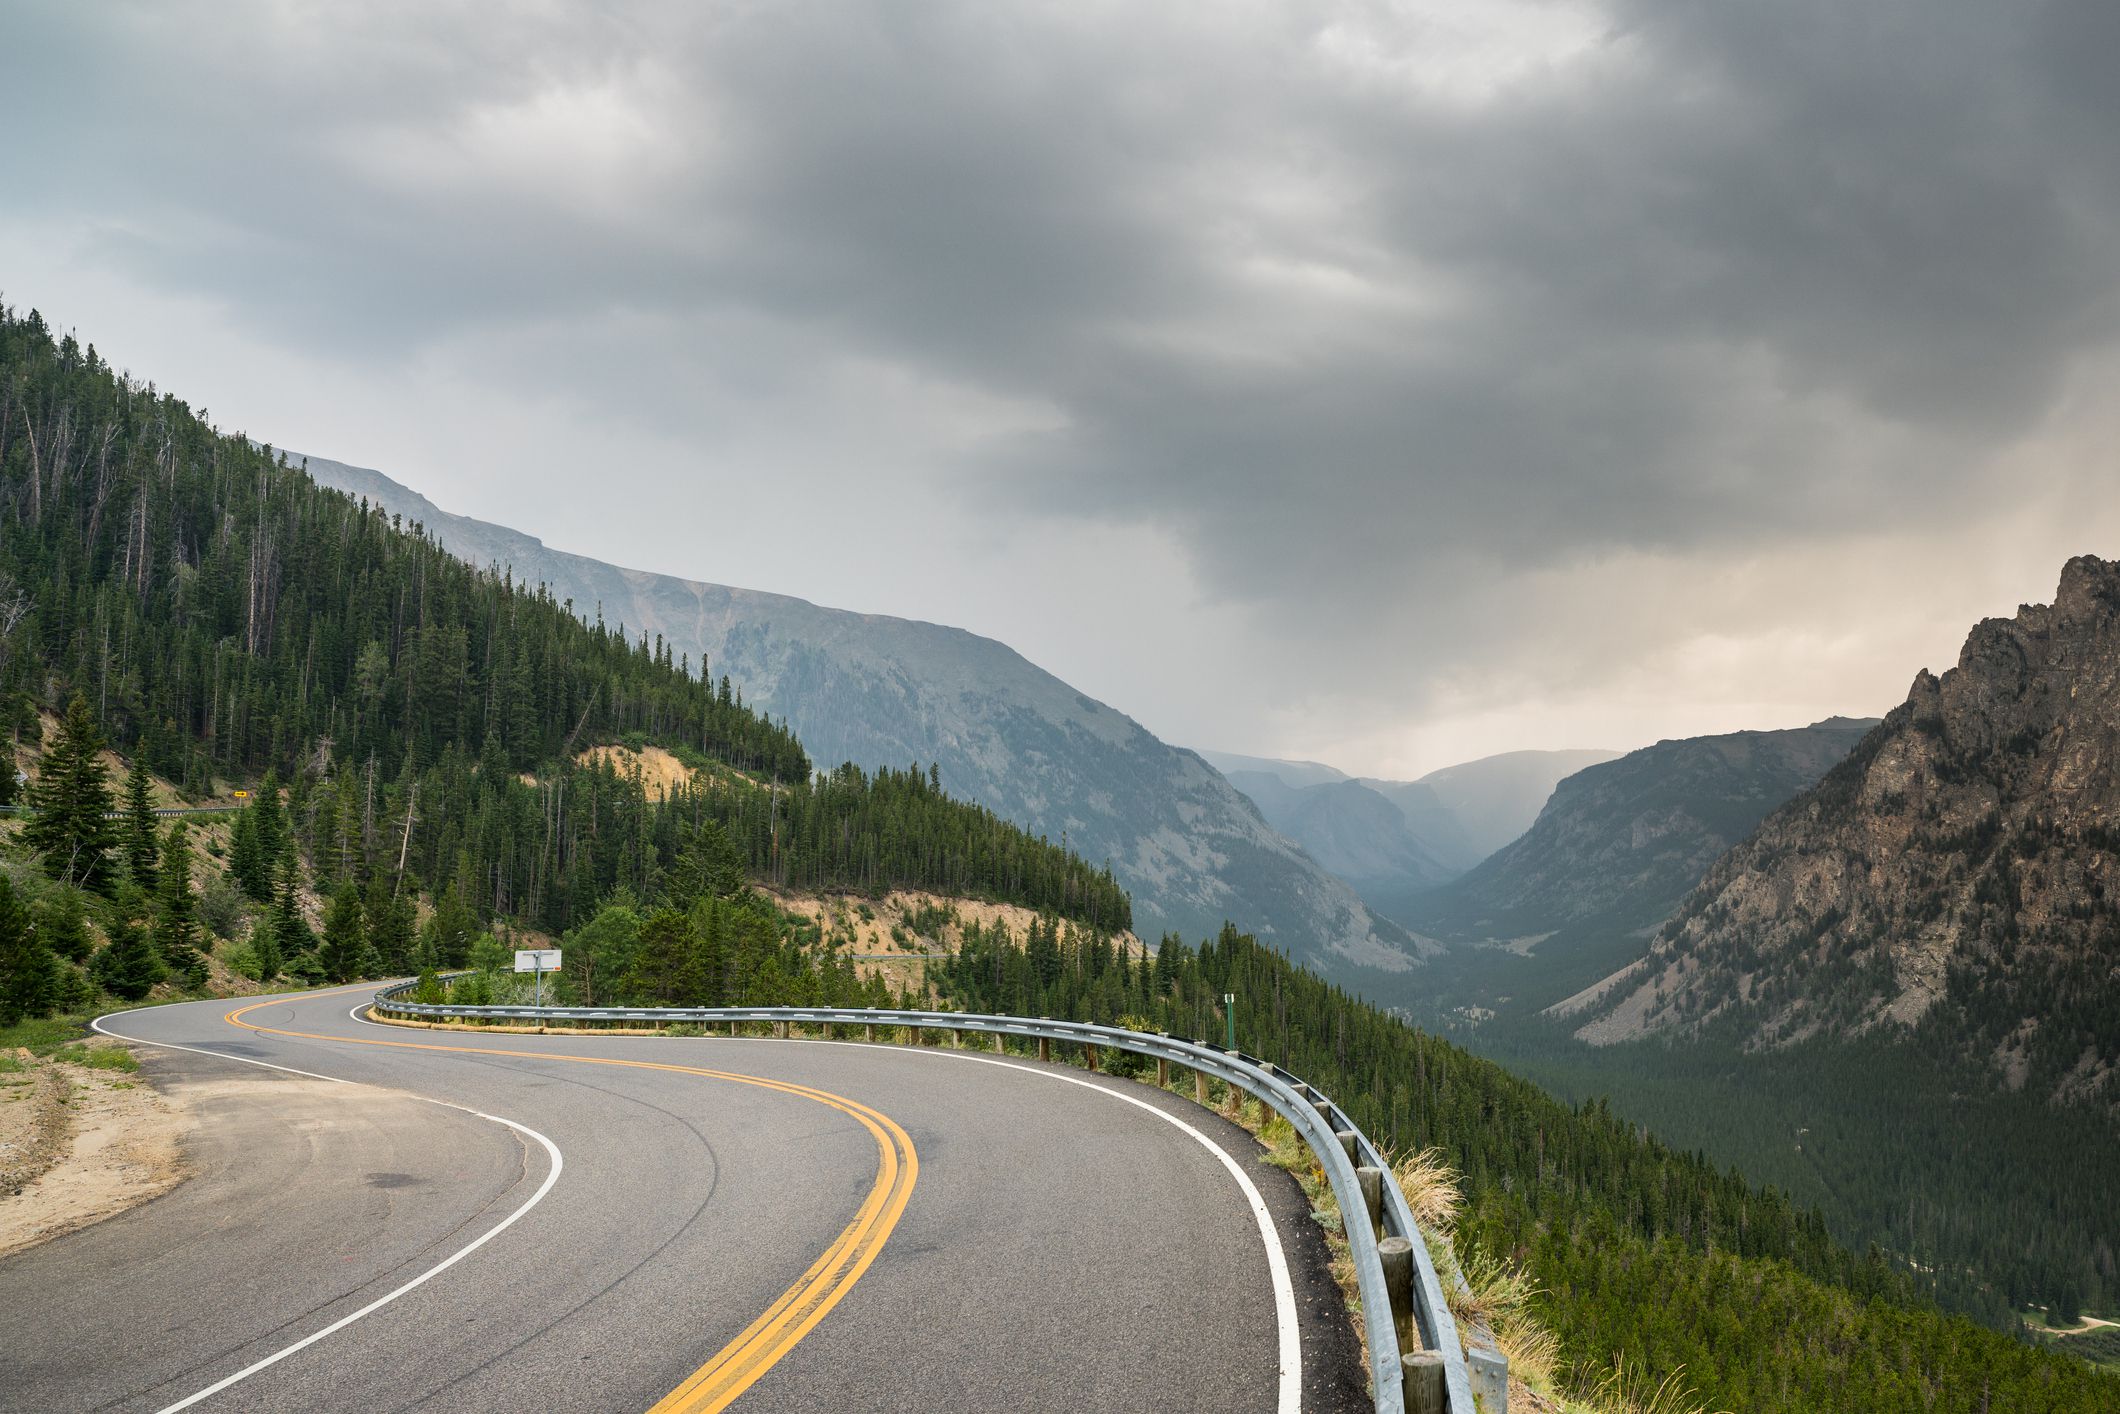 <p><b>Wyoming and Montana  </b><a href="https://www.redlodge.com/beartooth-highway.asp">This iconic 68-mile pass</a> isn't known for quaint towns or relaxing cruising. What you <i>will</i> get is a dizzying climb and descent, abundant twists and turns, and some of the nation's most dazzling mountain scenery. "You can make a pit stop or two to photograph the scenic mountain lakes or to make a few snowballs deep into summer," says Melanie Musson, an insurance expert for AutoInsurance.org and an avid motorcycle rider. "There's a possibility you may see wildlife like mountain goats, grizzly bears, or black bears. And since you'll cross through so many habitats on your climb, there will always be a zone of abundant wildflowers." The pass is typically open from the end of May through mid-October, but check weather conditions before you go, since snow is possible well into June.</p>  <p><b>Can't-miss stop: </b>At the western end of Beartooth Pass, Yellowstone National Park beckons. Close to the entrance is Lamar Valley, a prime spot to spy bison, elk, bears, and even wolves.</p><p><b>Related:</b> <a href="https://blog.cheapism.com/best-scenic-drives-16955/">23 Scenic Roads You Can Drive Only Around the Summer</a></p>